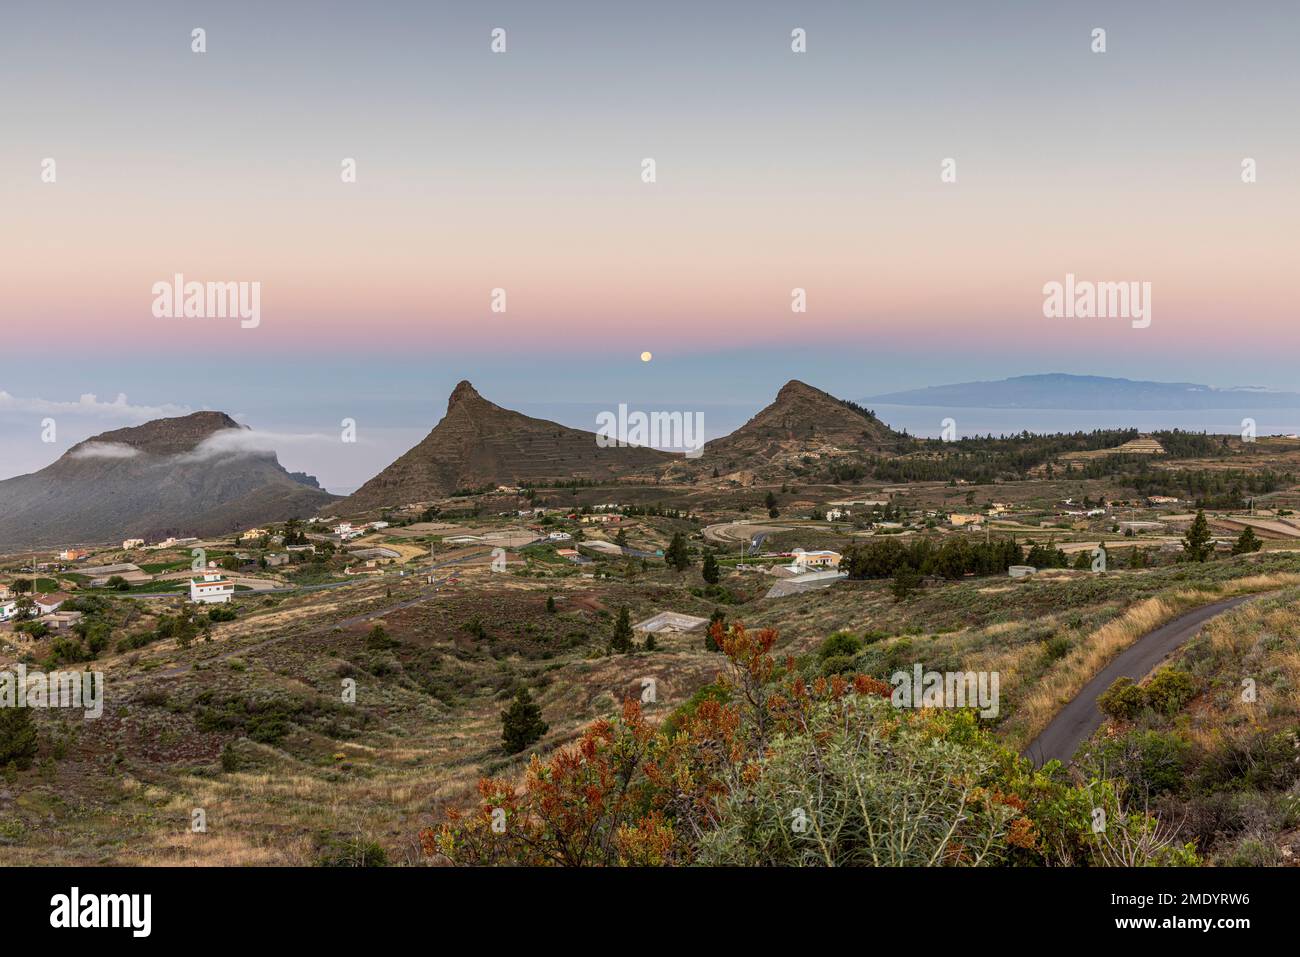 View over the village of Ifonche to the coastal resorts of Los Cristianos and Las Americas at dawn with the full moon setting in the west, Adeje, Tene Stock Photo